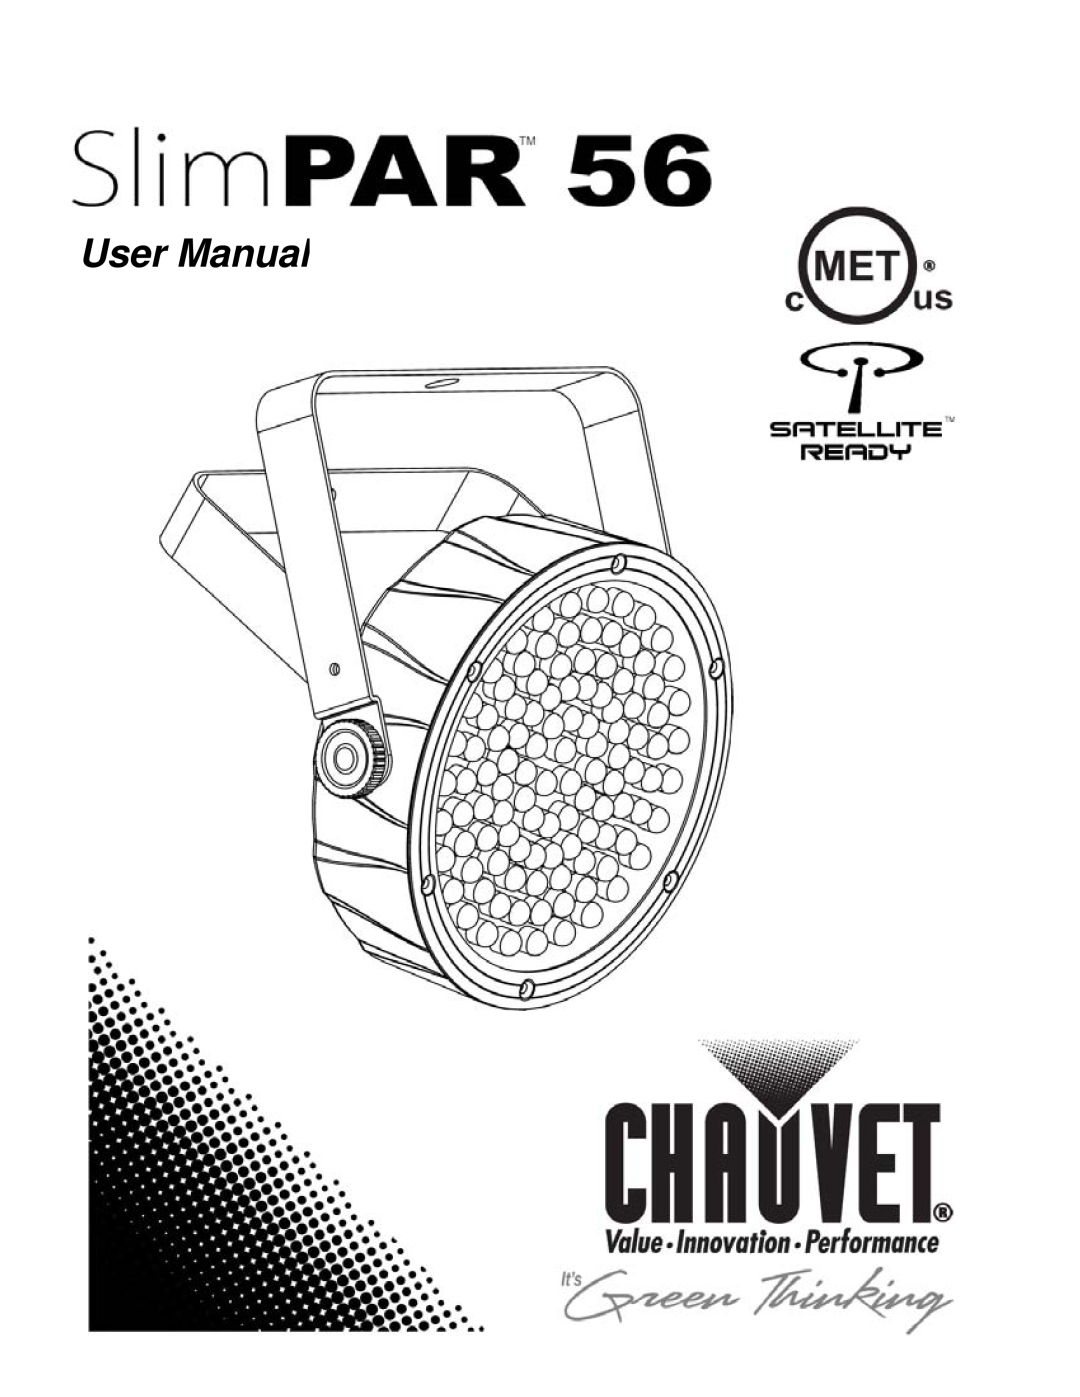 Chauvet 64, 56 manual It’s, Tons of output, without breaking a sweat, Strobe and wash effect in one 